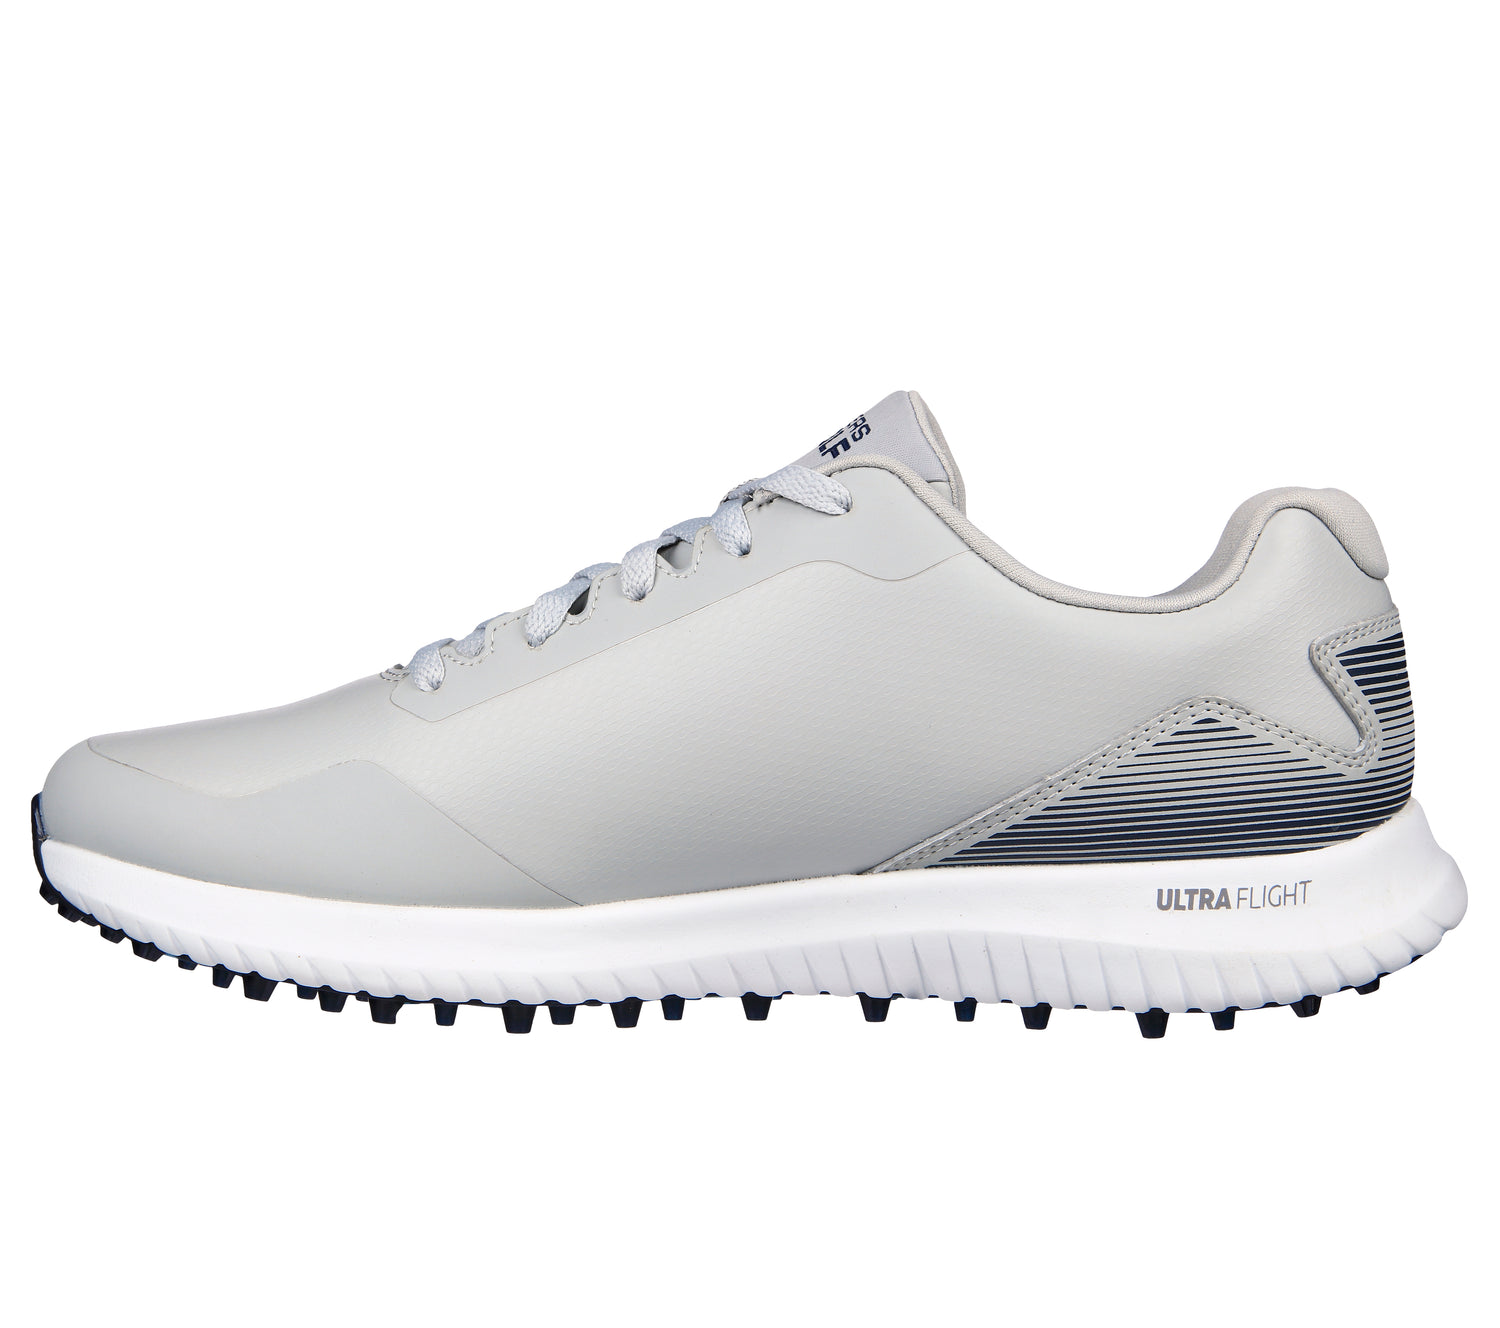 Skechers Go Golf Max 2 Golf Shoes 214028 + Free Gift   